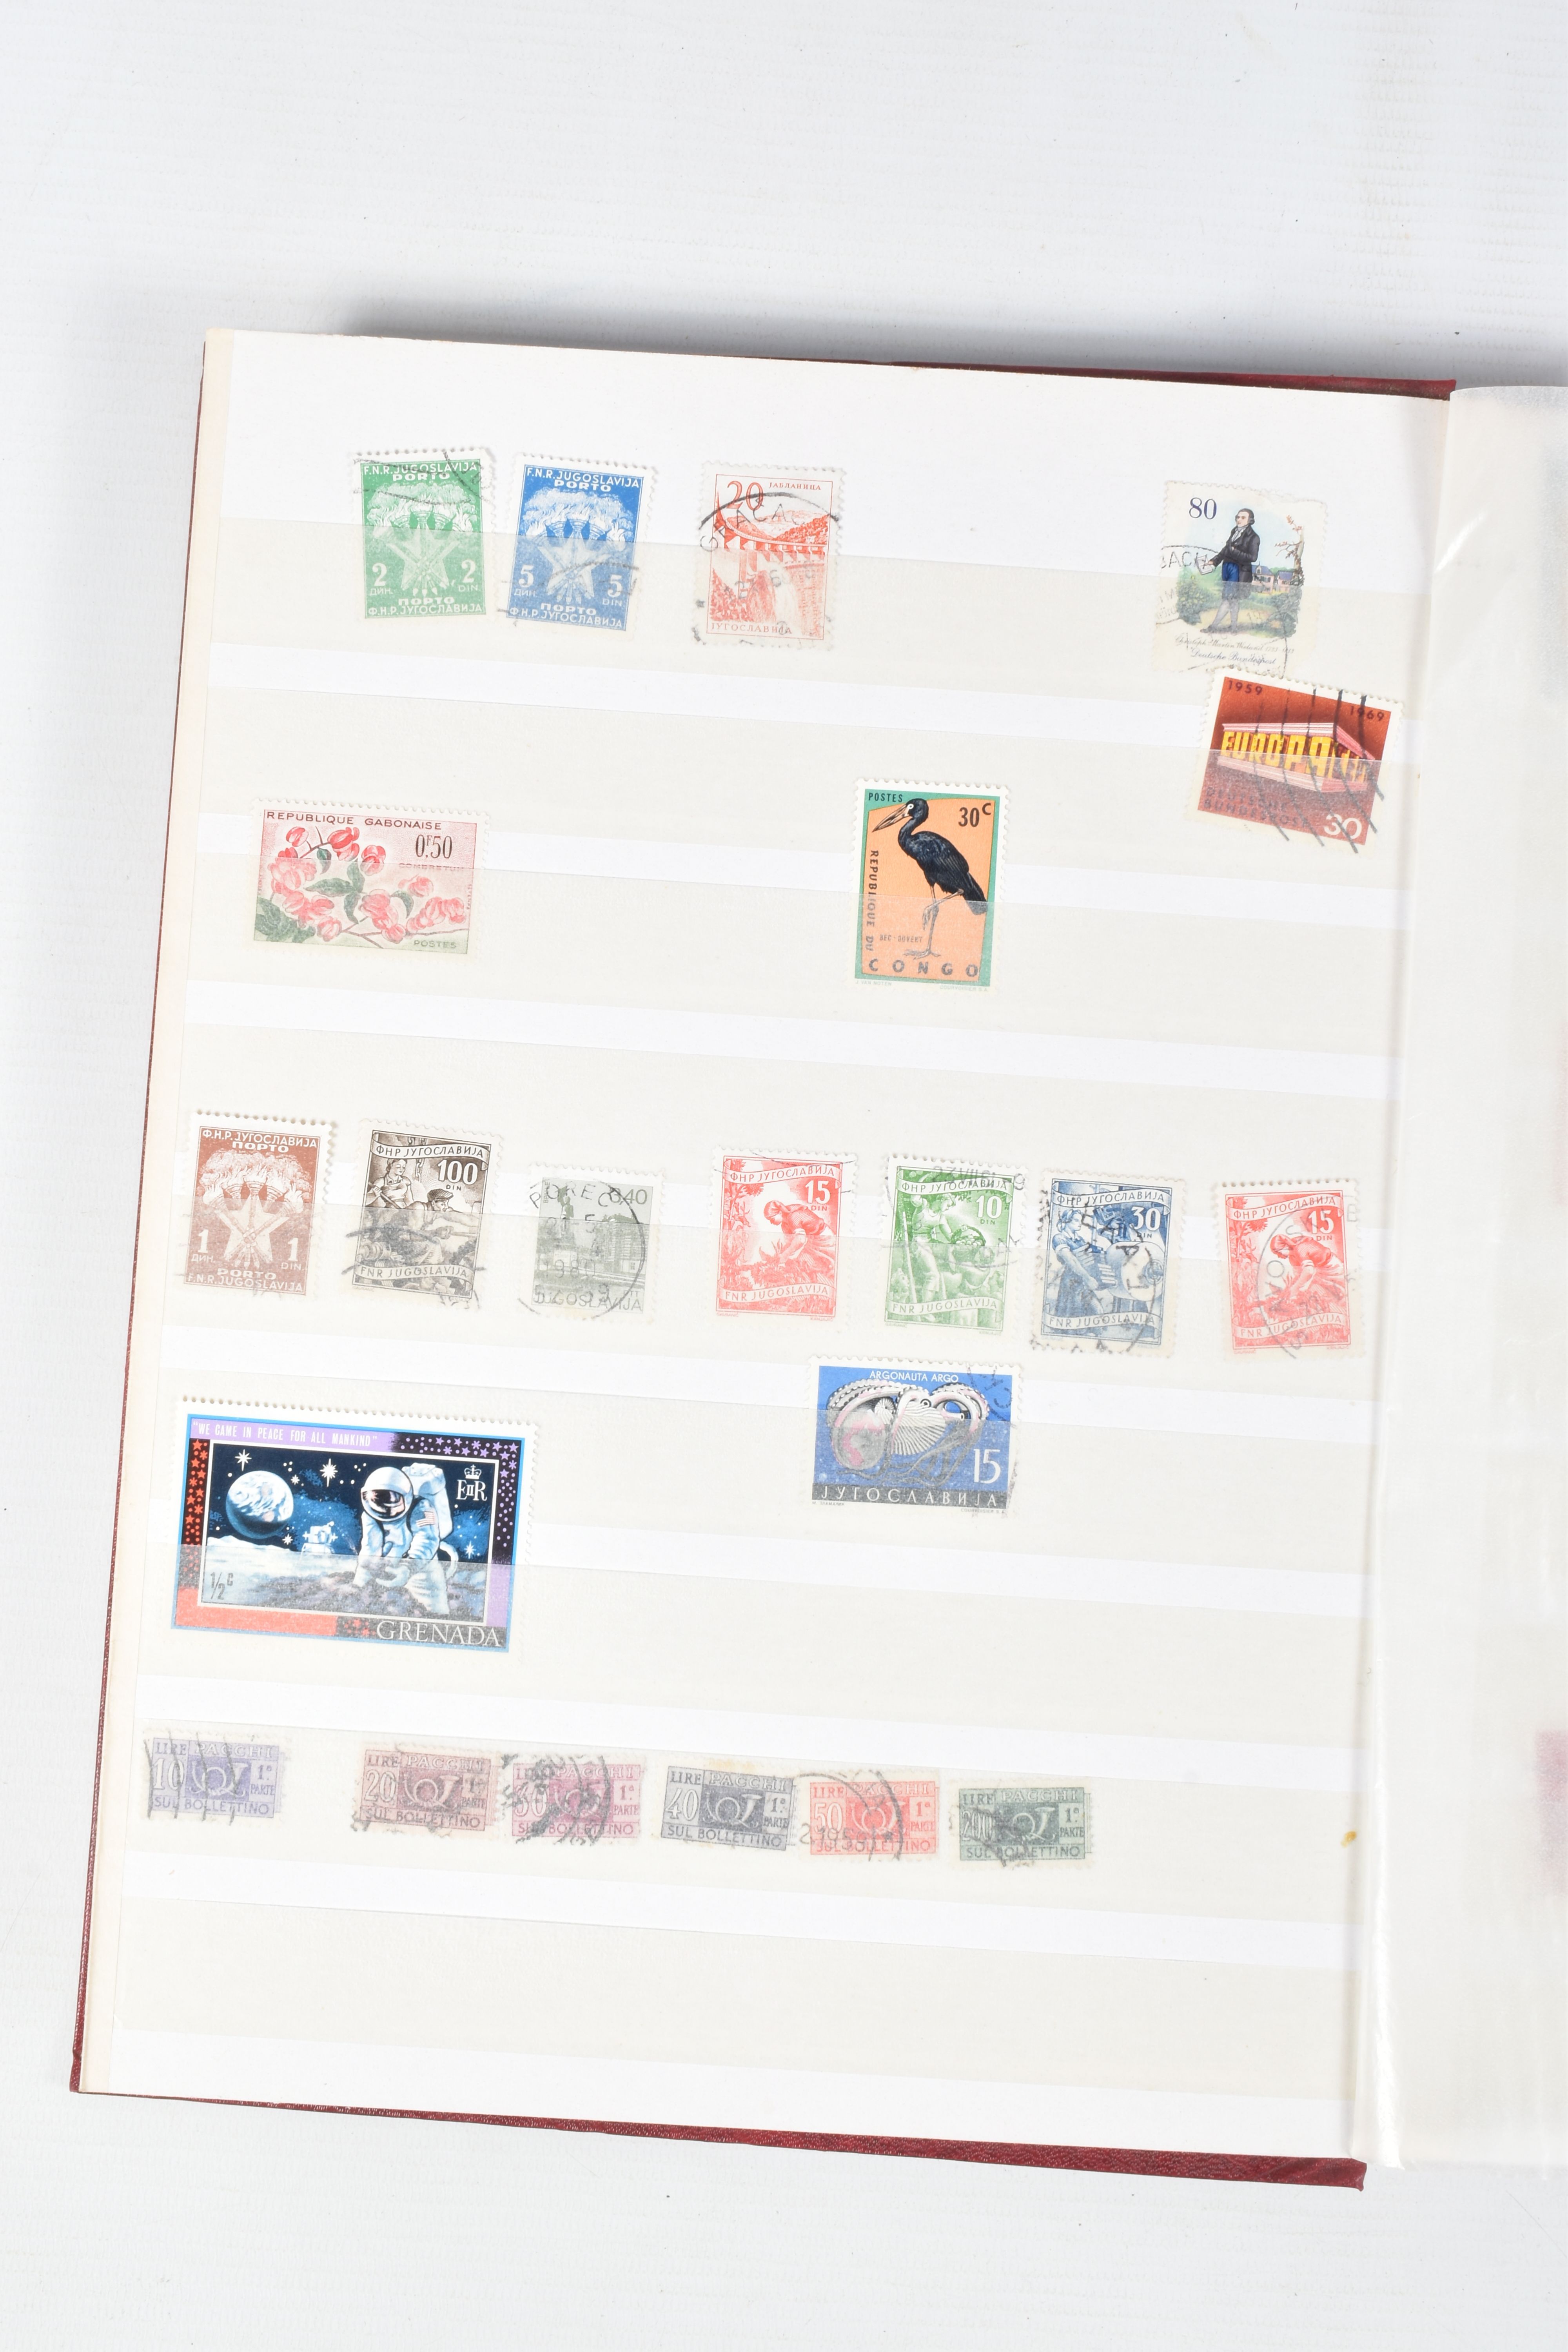 TWO BAGS WITH A COLLECTION OF GB FDCS POSSIBLY COMPLETE FOR BASIC COMMEMORATIVES FROM 1979-2007. - Image 10 of 22